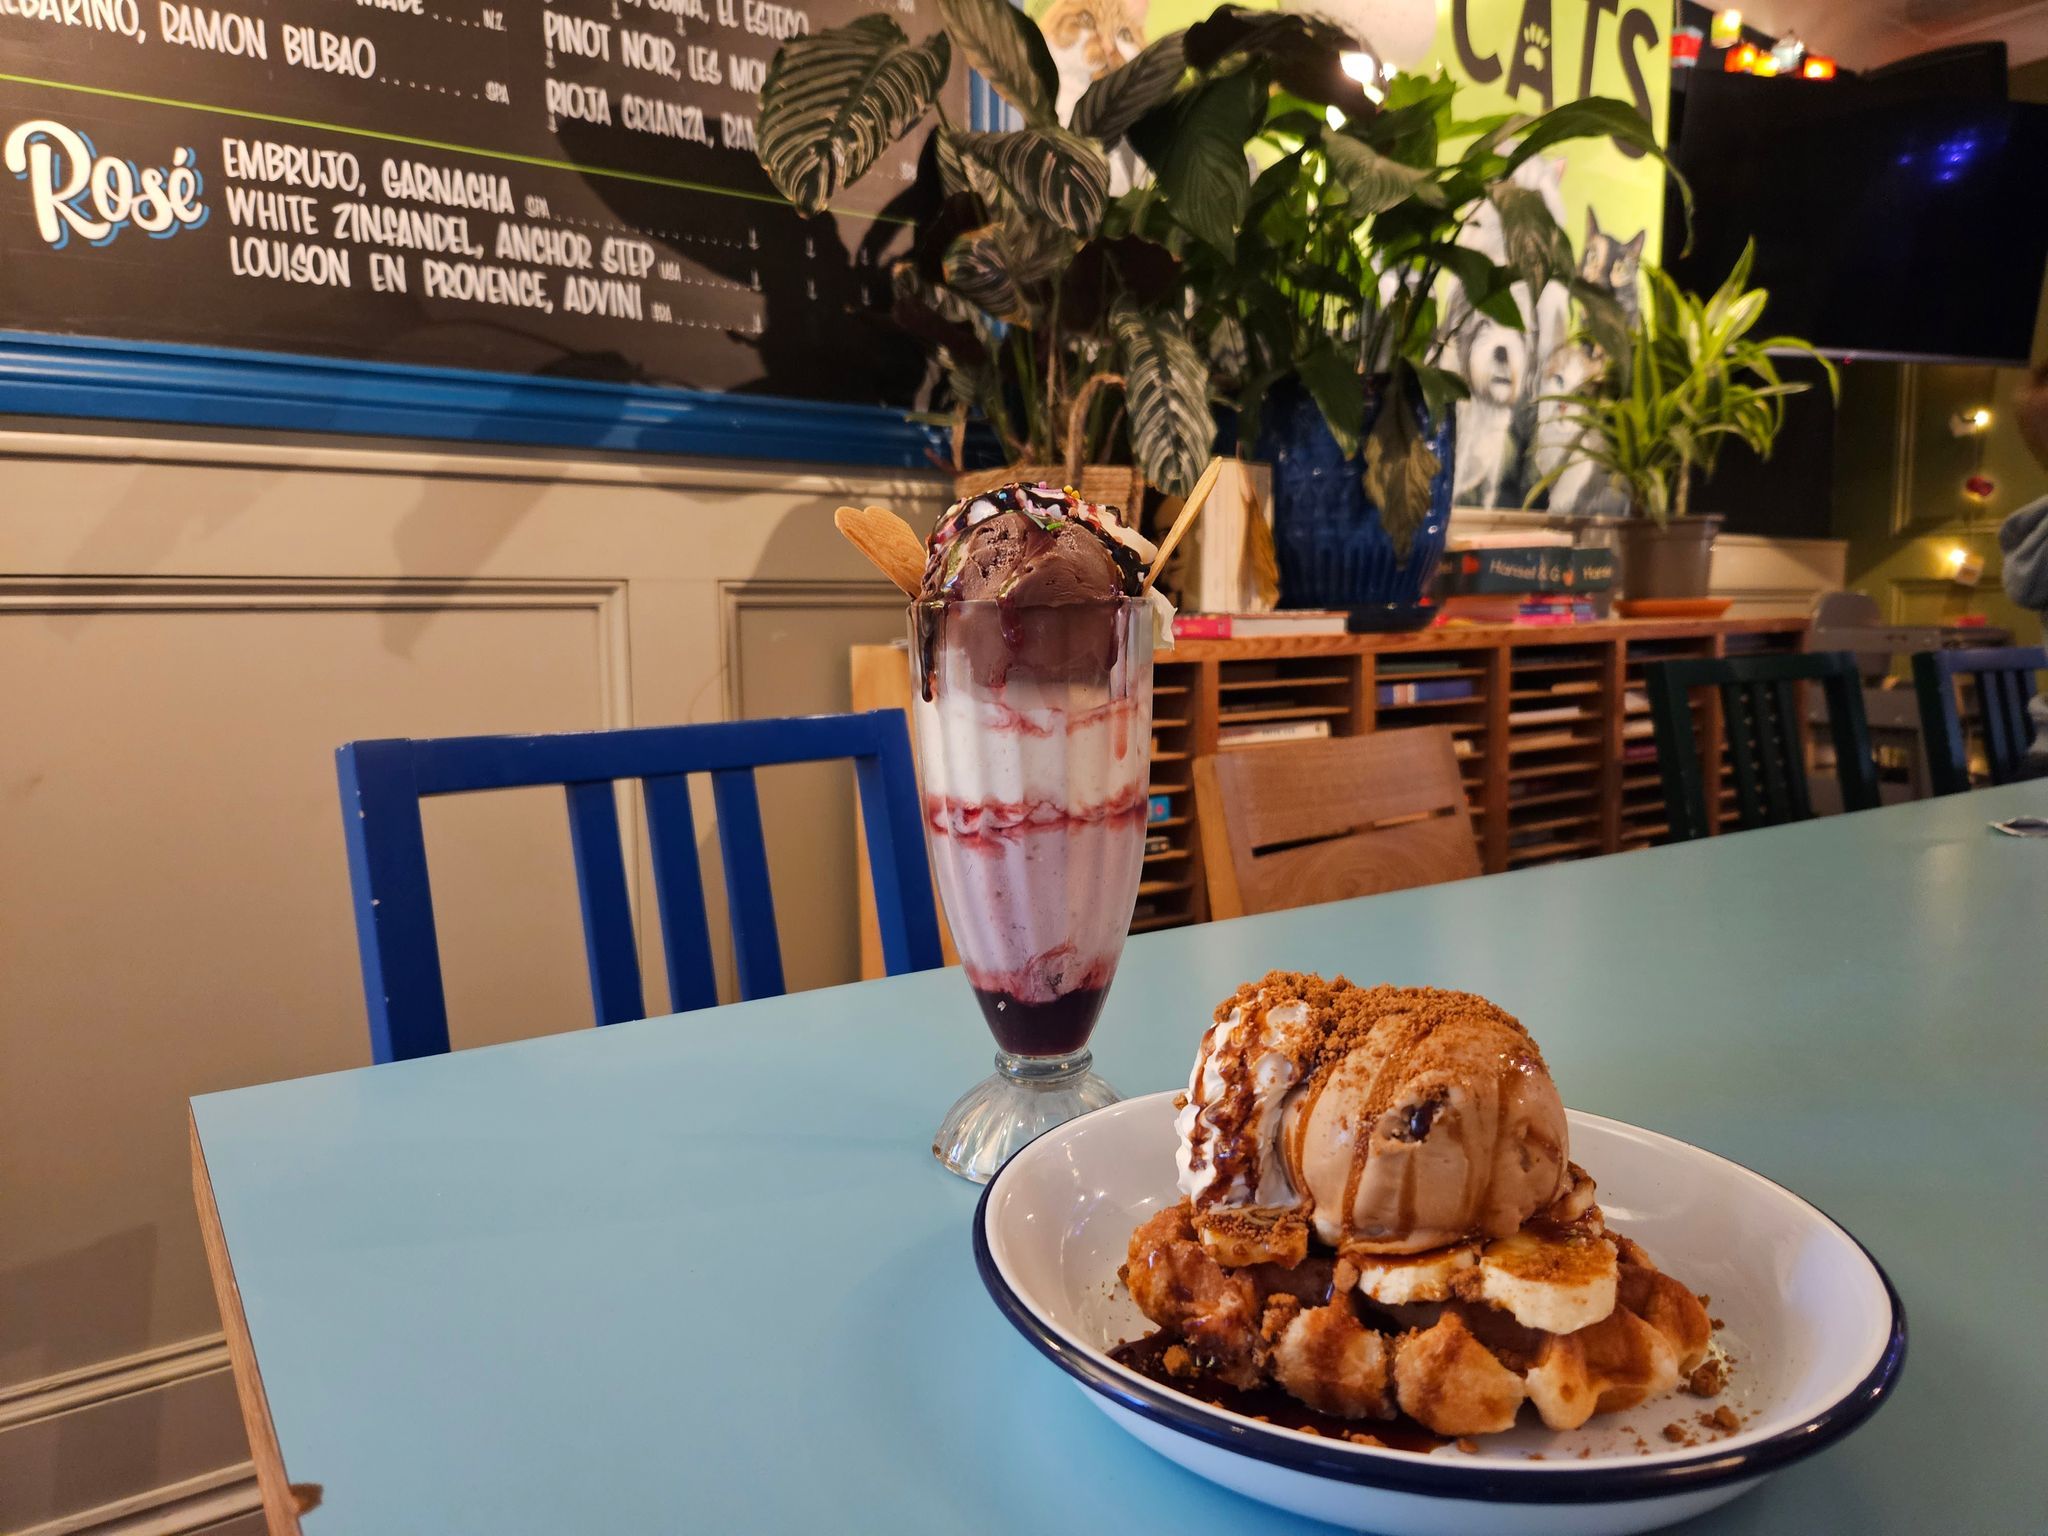 Neapolitan Sundae and Ice cream waffle on the light blue table served as a dessert for the family dinner at The Lewes Road Inn